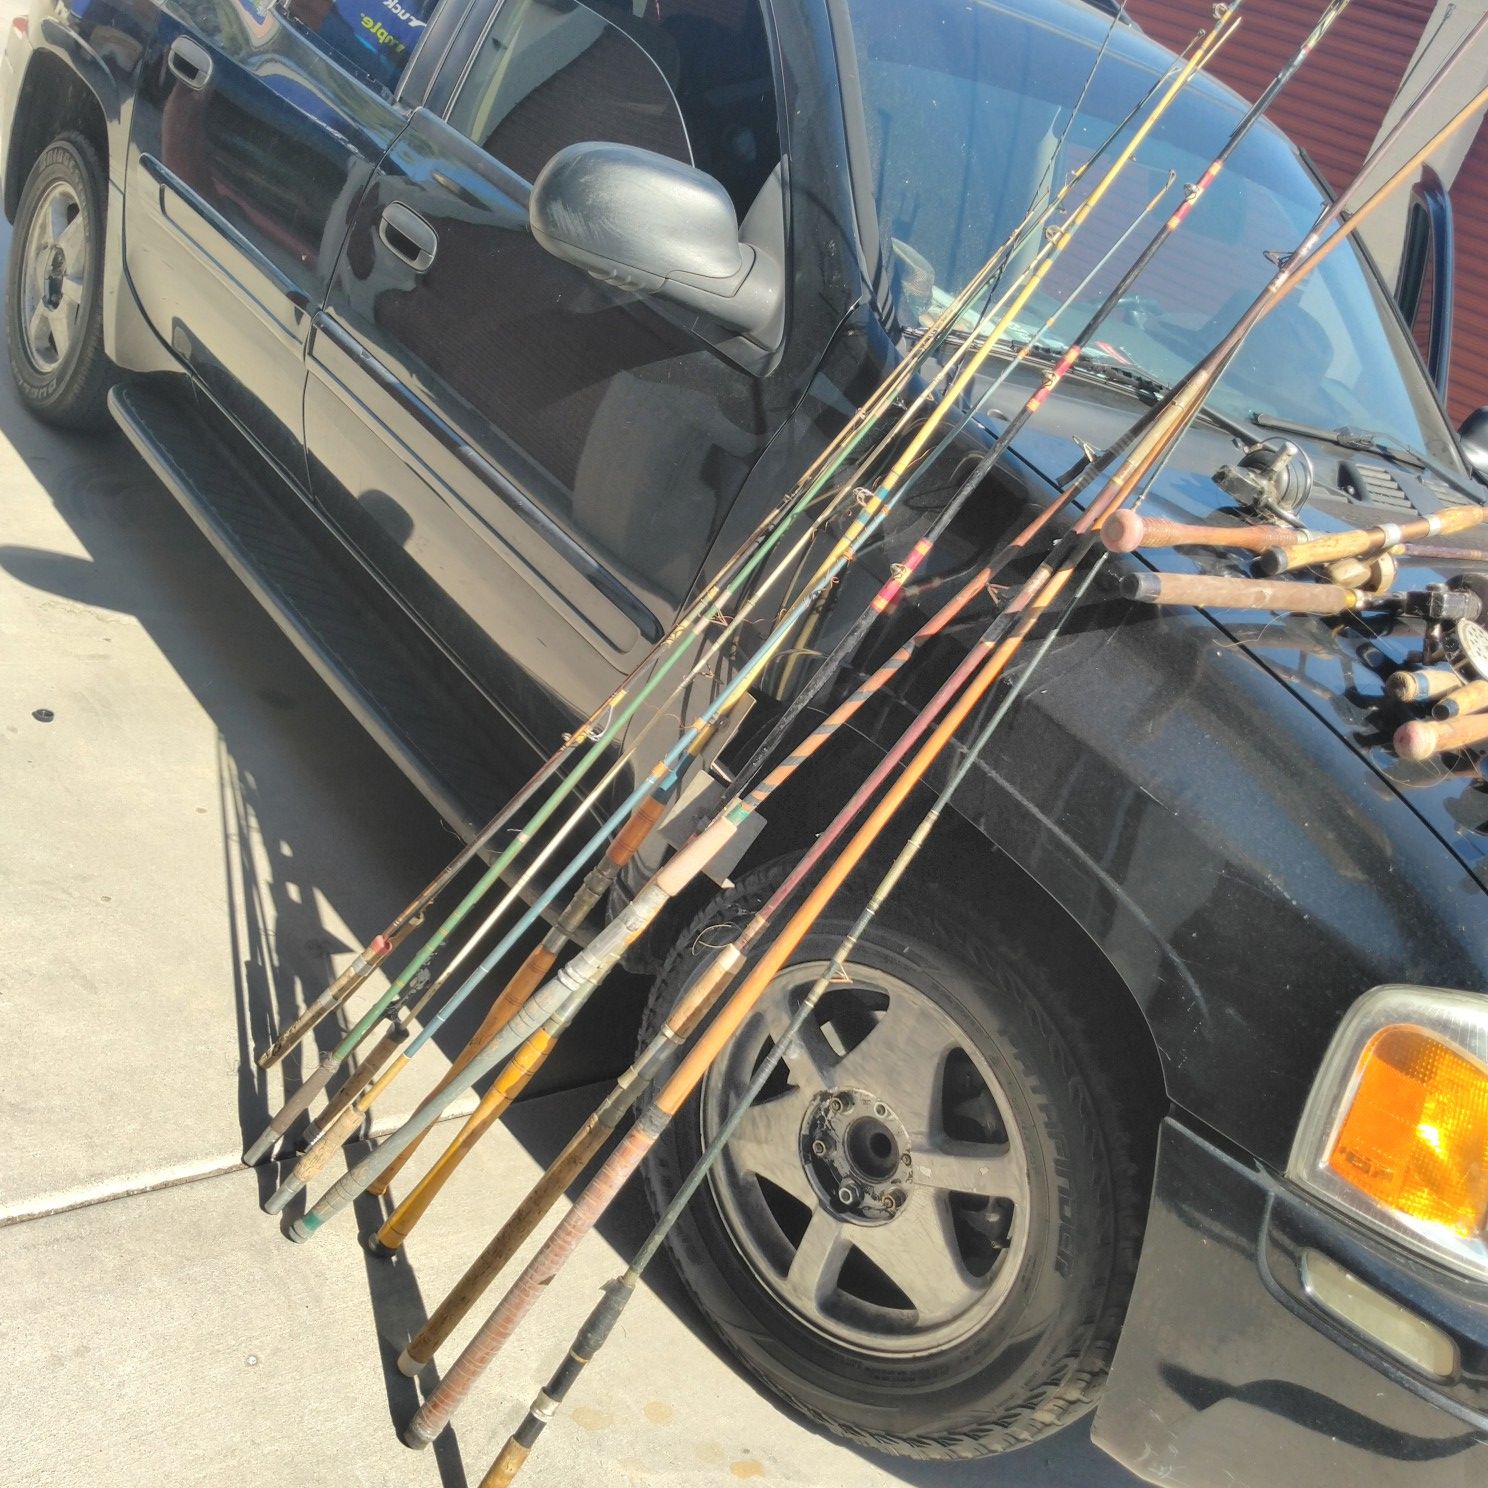 vintage 1940s+ 1970s rods and reels worth close to $1000